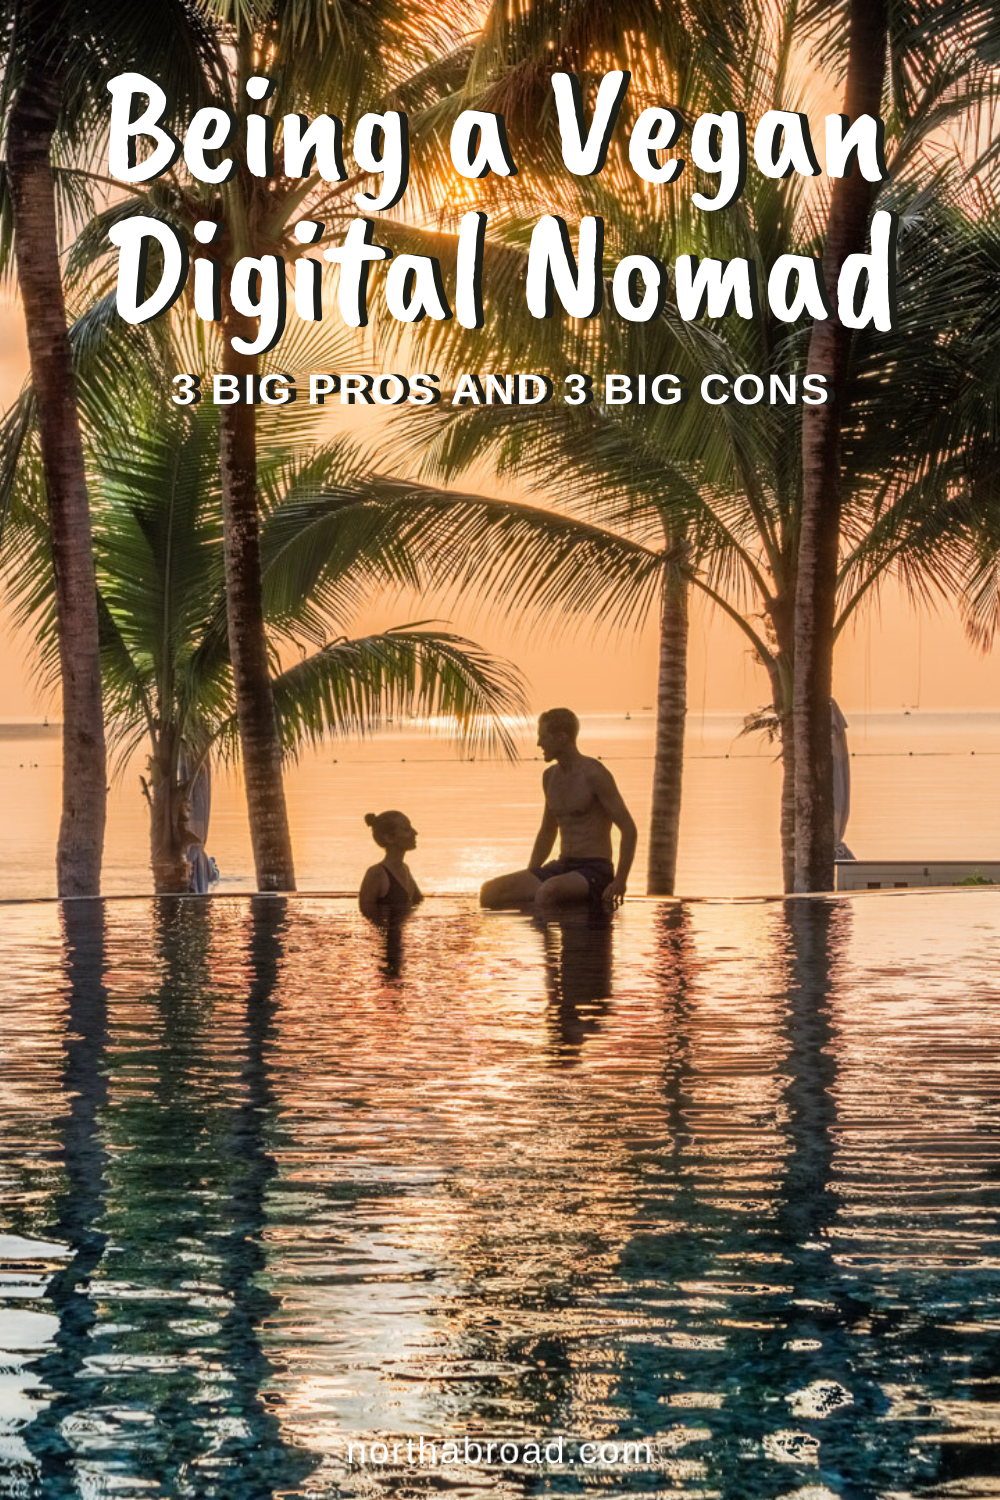 3 Big Pros (and 3 Big Cons) of Being a Vegan Digital Nomad